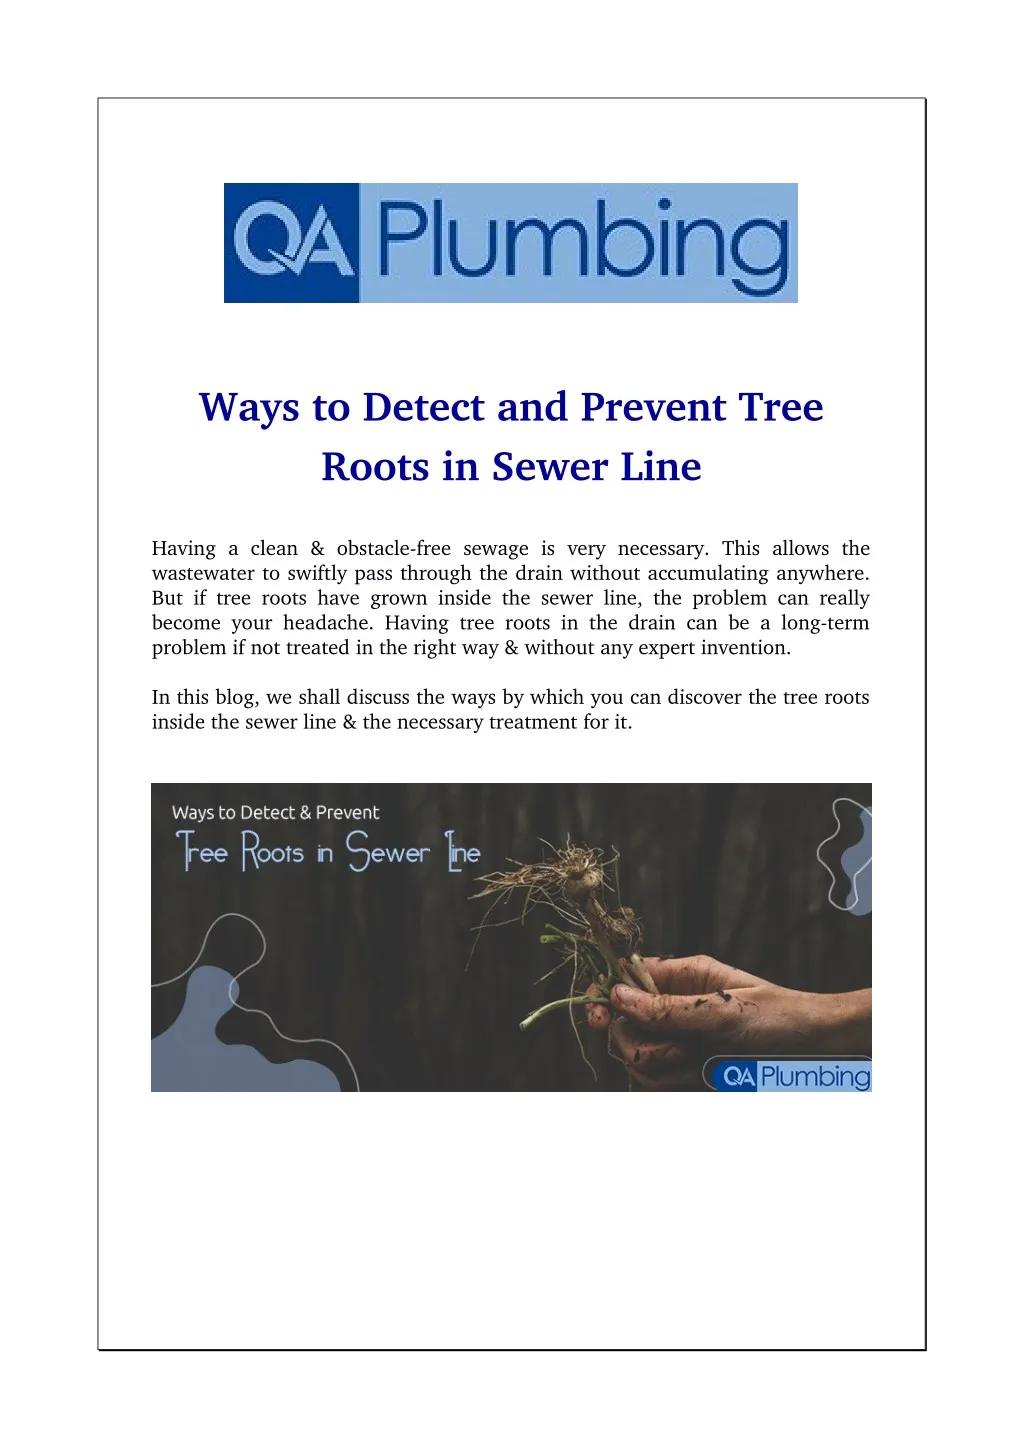 ways to detect and prevent tree roots in sewer